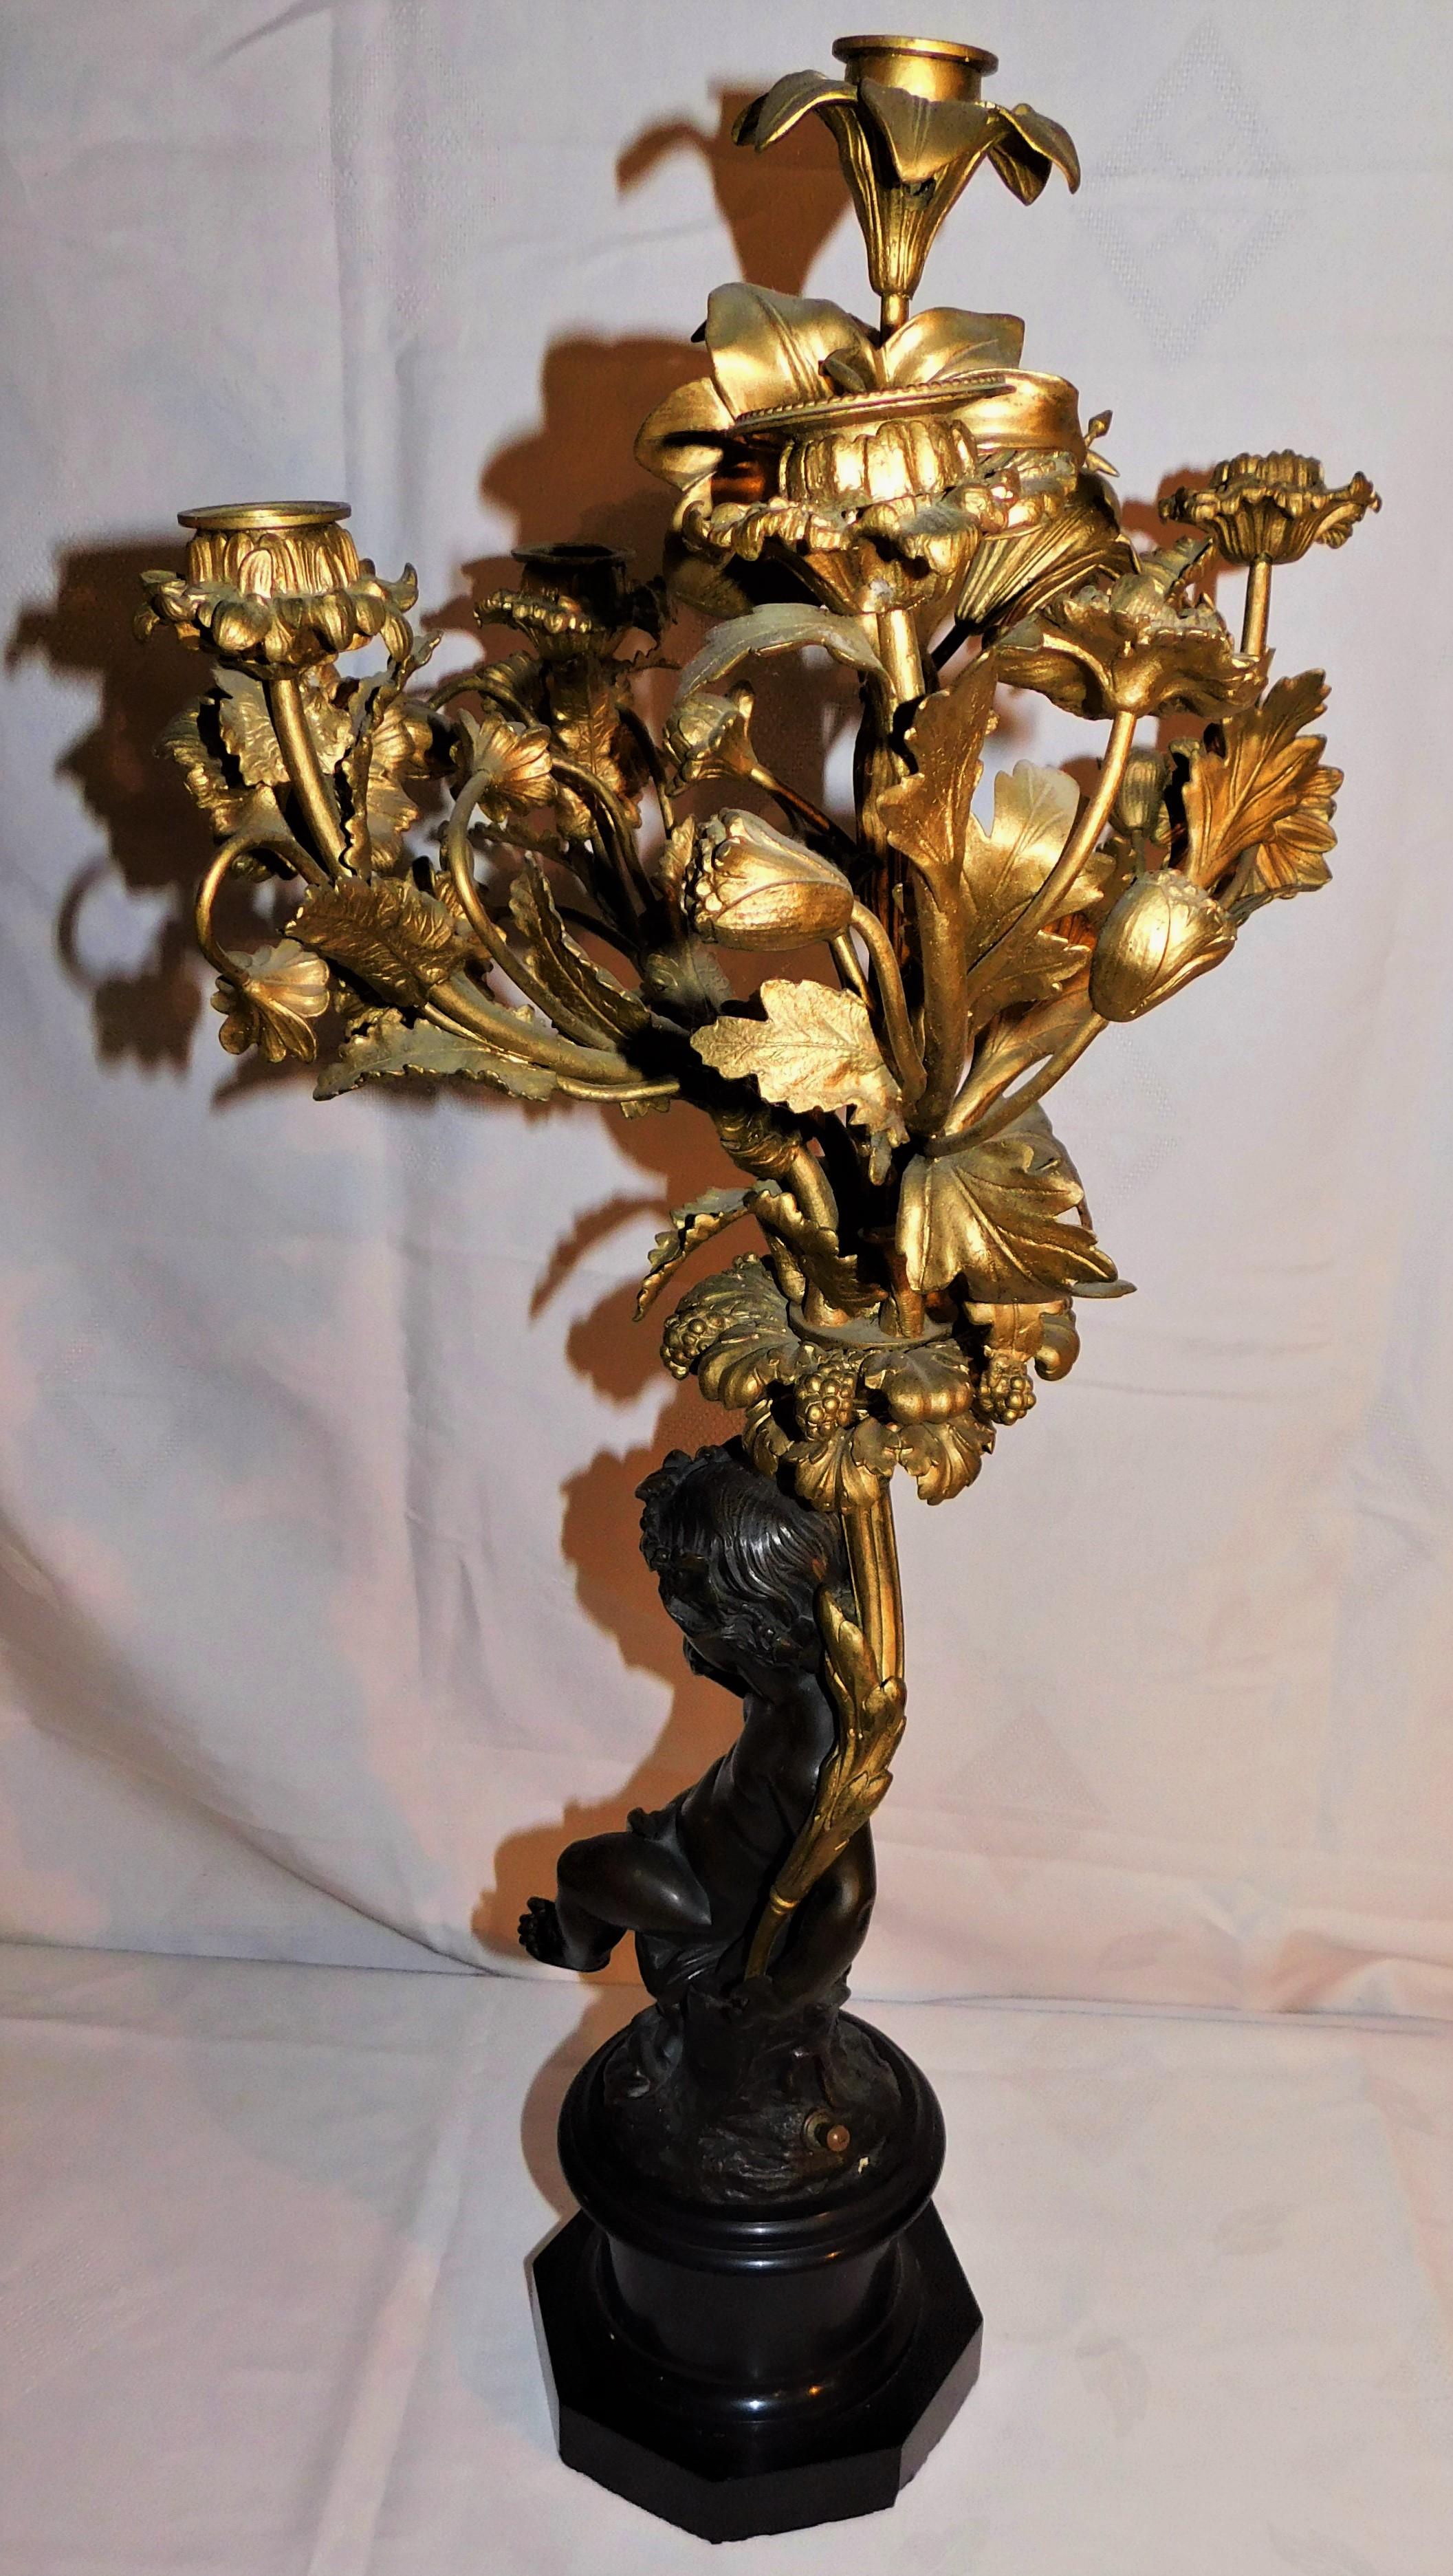 Pair of 19th Century French Gold Gilded Bronze Putti Cherubs Candelabras For Sale 1